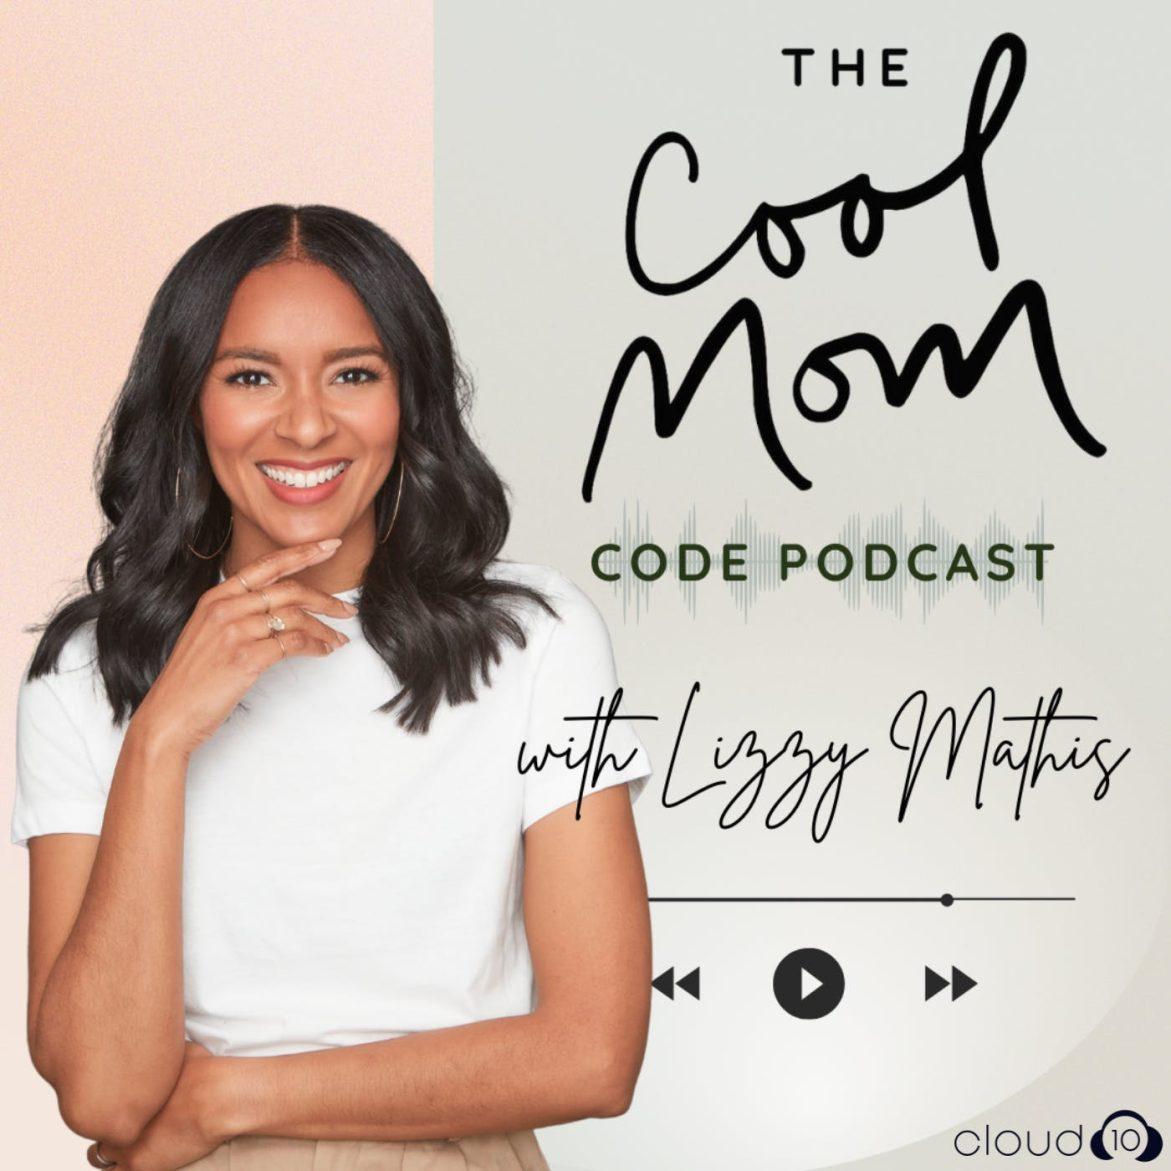 Black Podcasting - Welcome to The Cool Mom Code Podcast